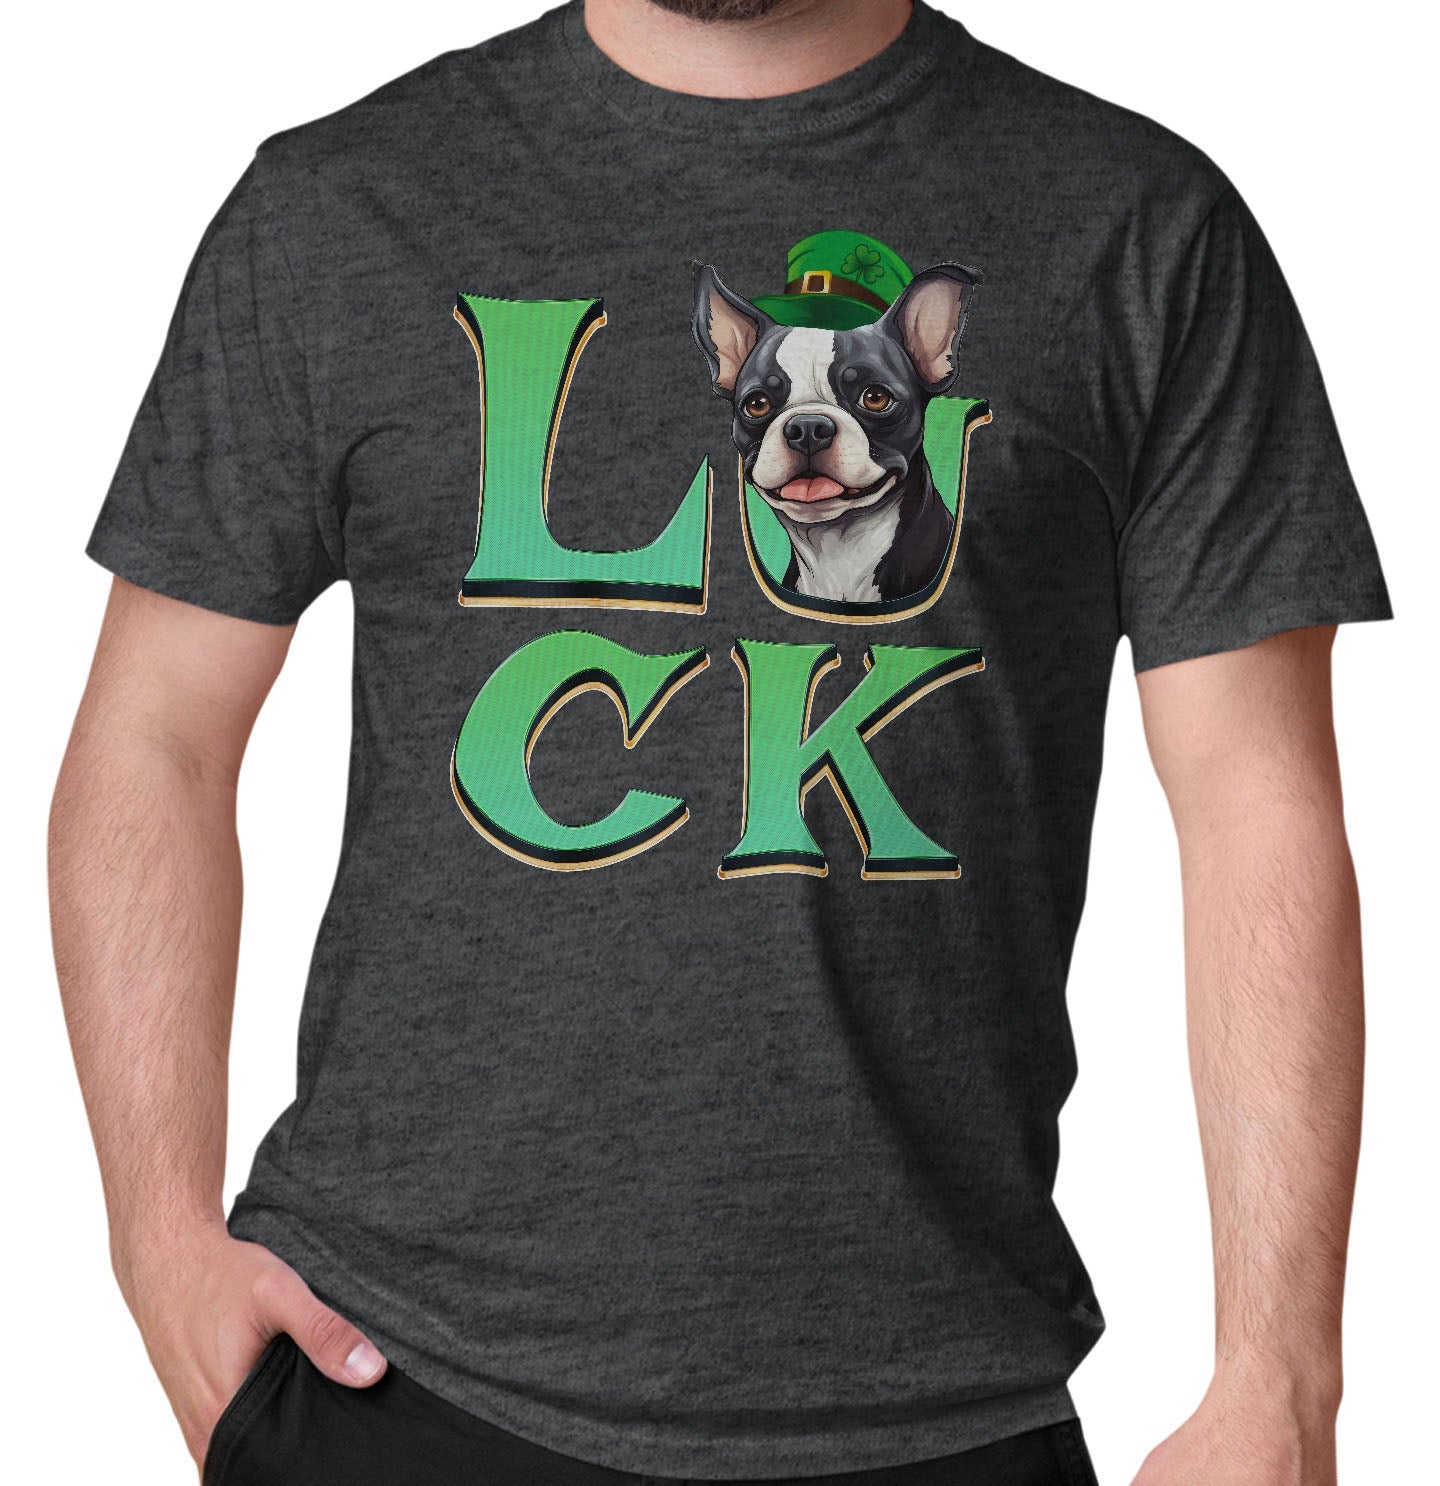 Big LUCK St. Patrick's Day Boston Terrier - Adult Unisex T-Shirt